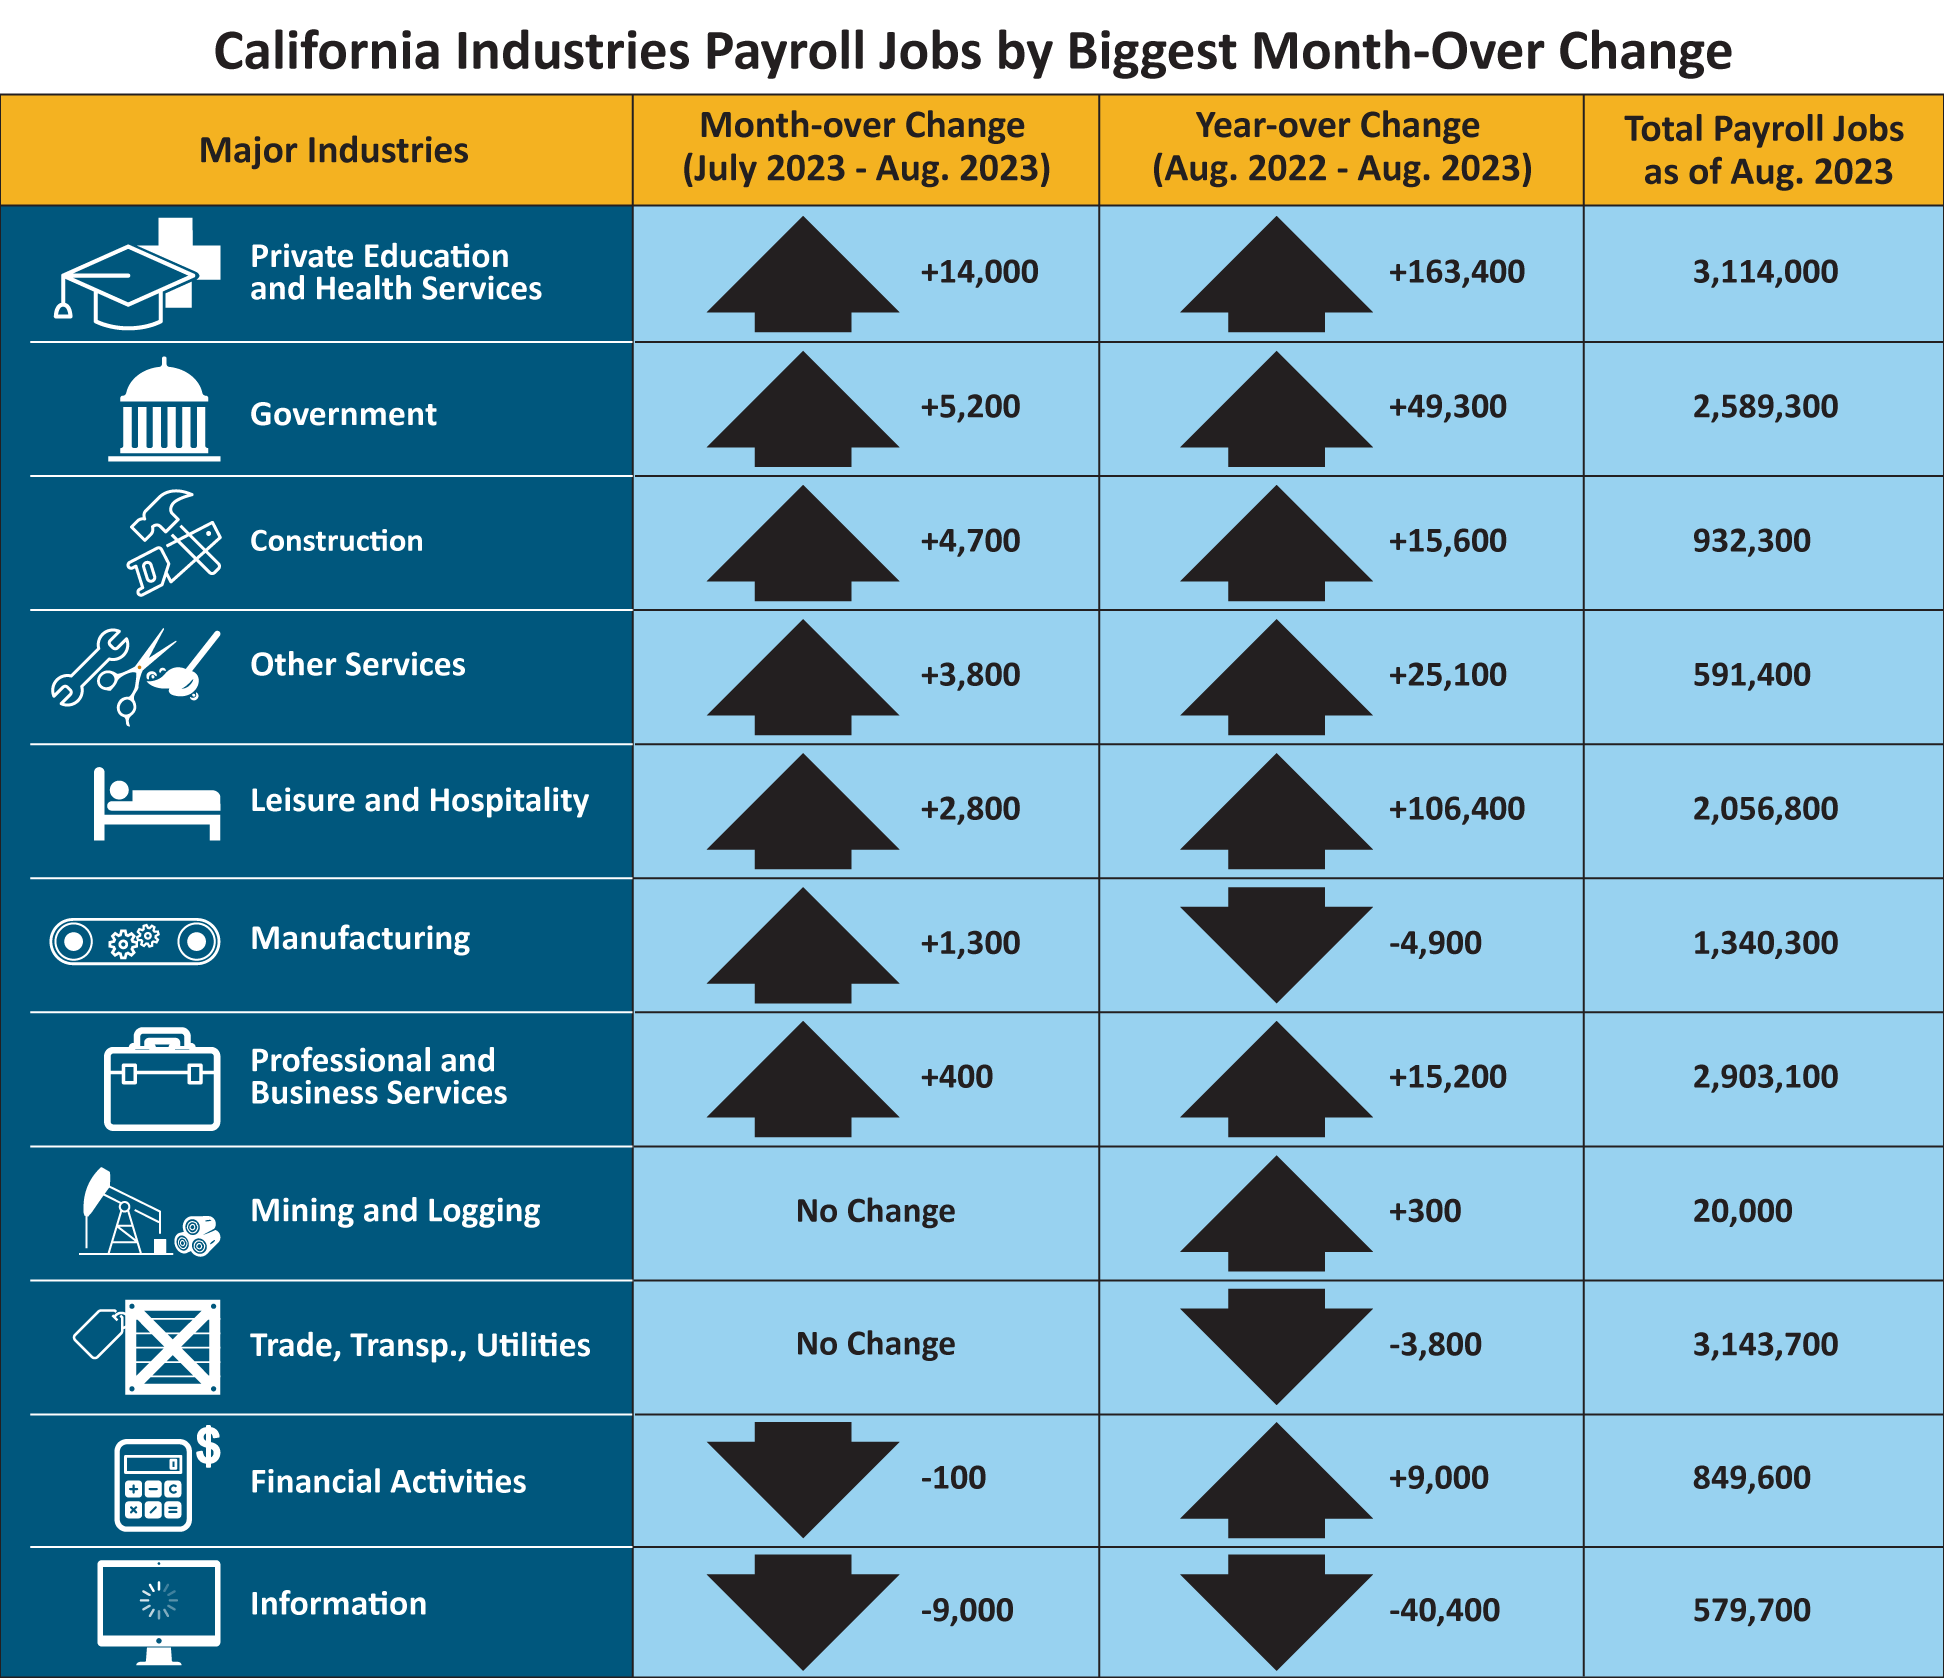 This table shows the number of California nonfarm payroll jobs grouped by major industries, with columns showing month-over and year-over change, plus total payroll jobs as of August 2023.  If you need an alternative format to access this information, contact the EDD Equal Employment Opportunity Office at EEOmail@edd.ca.gov or call toll free 1-866-490-8879. 